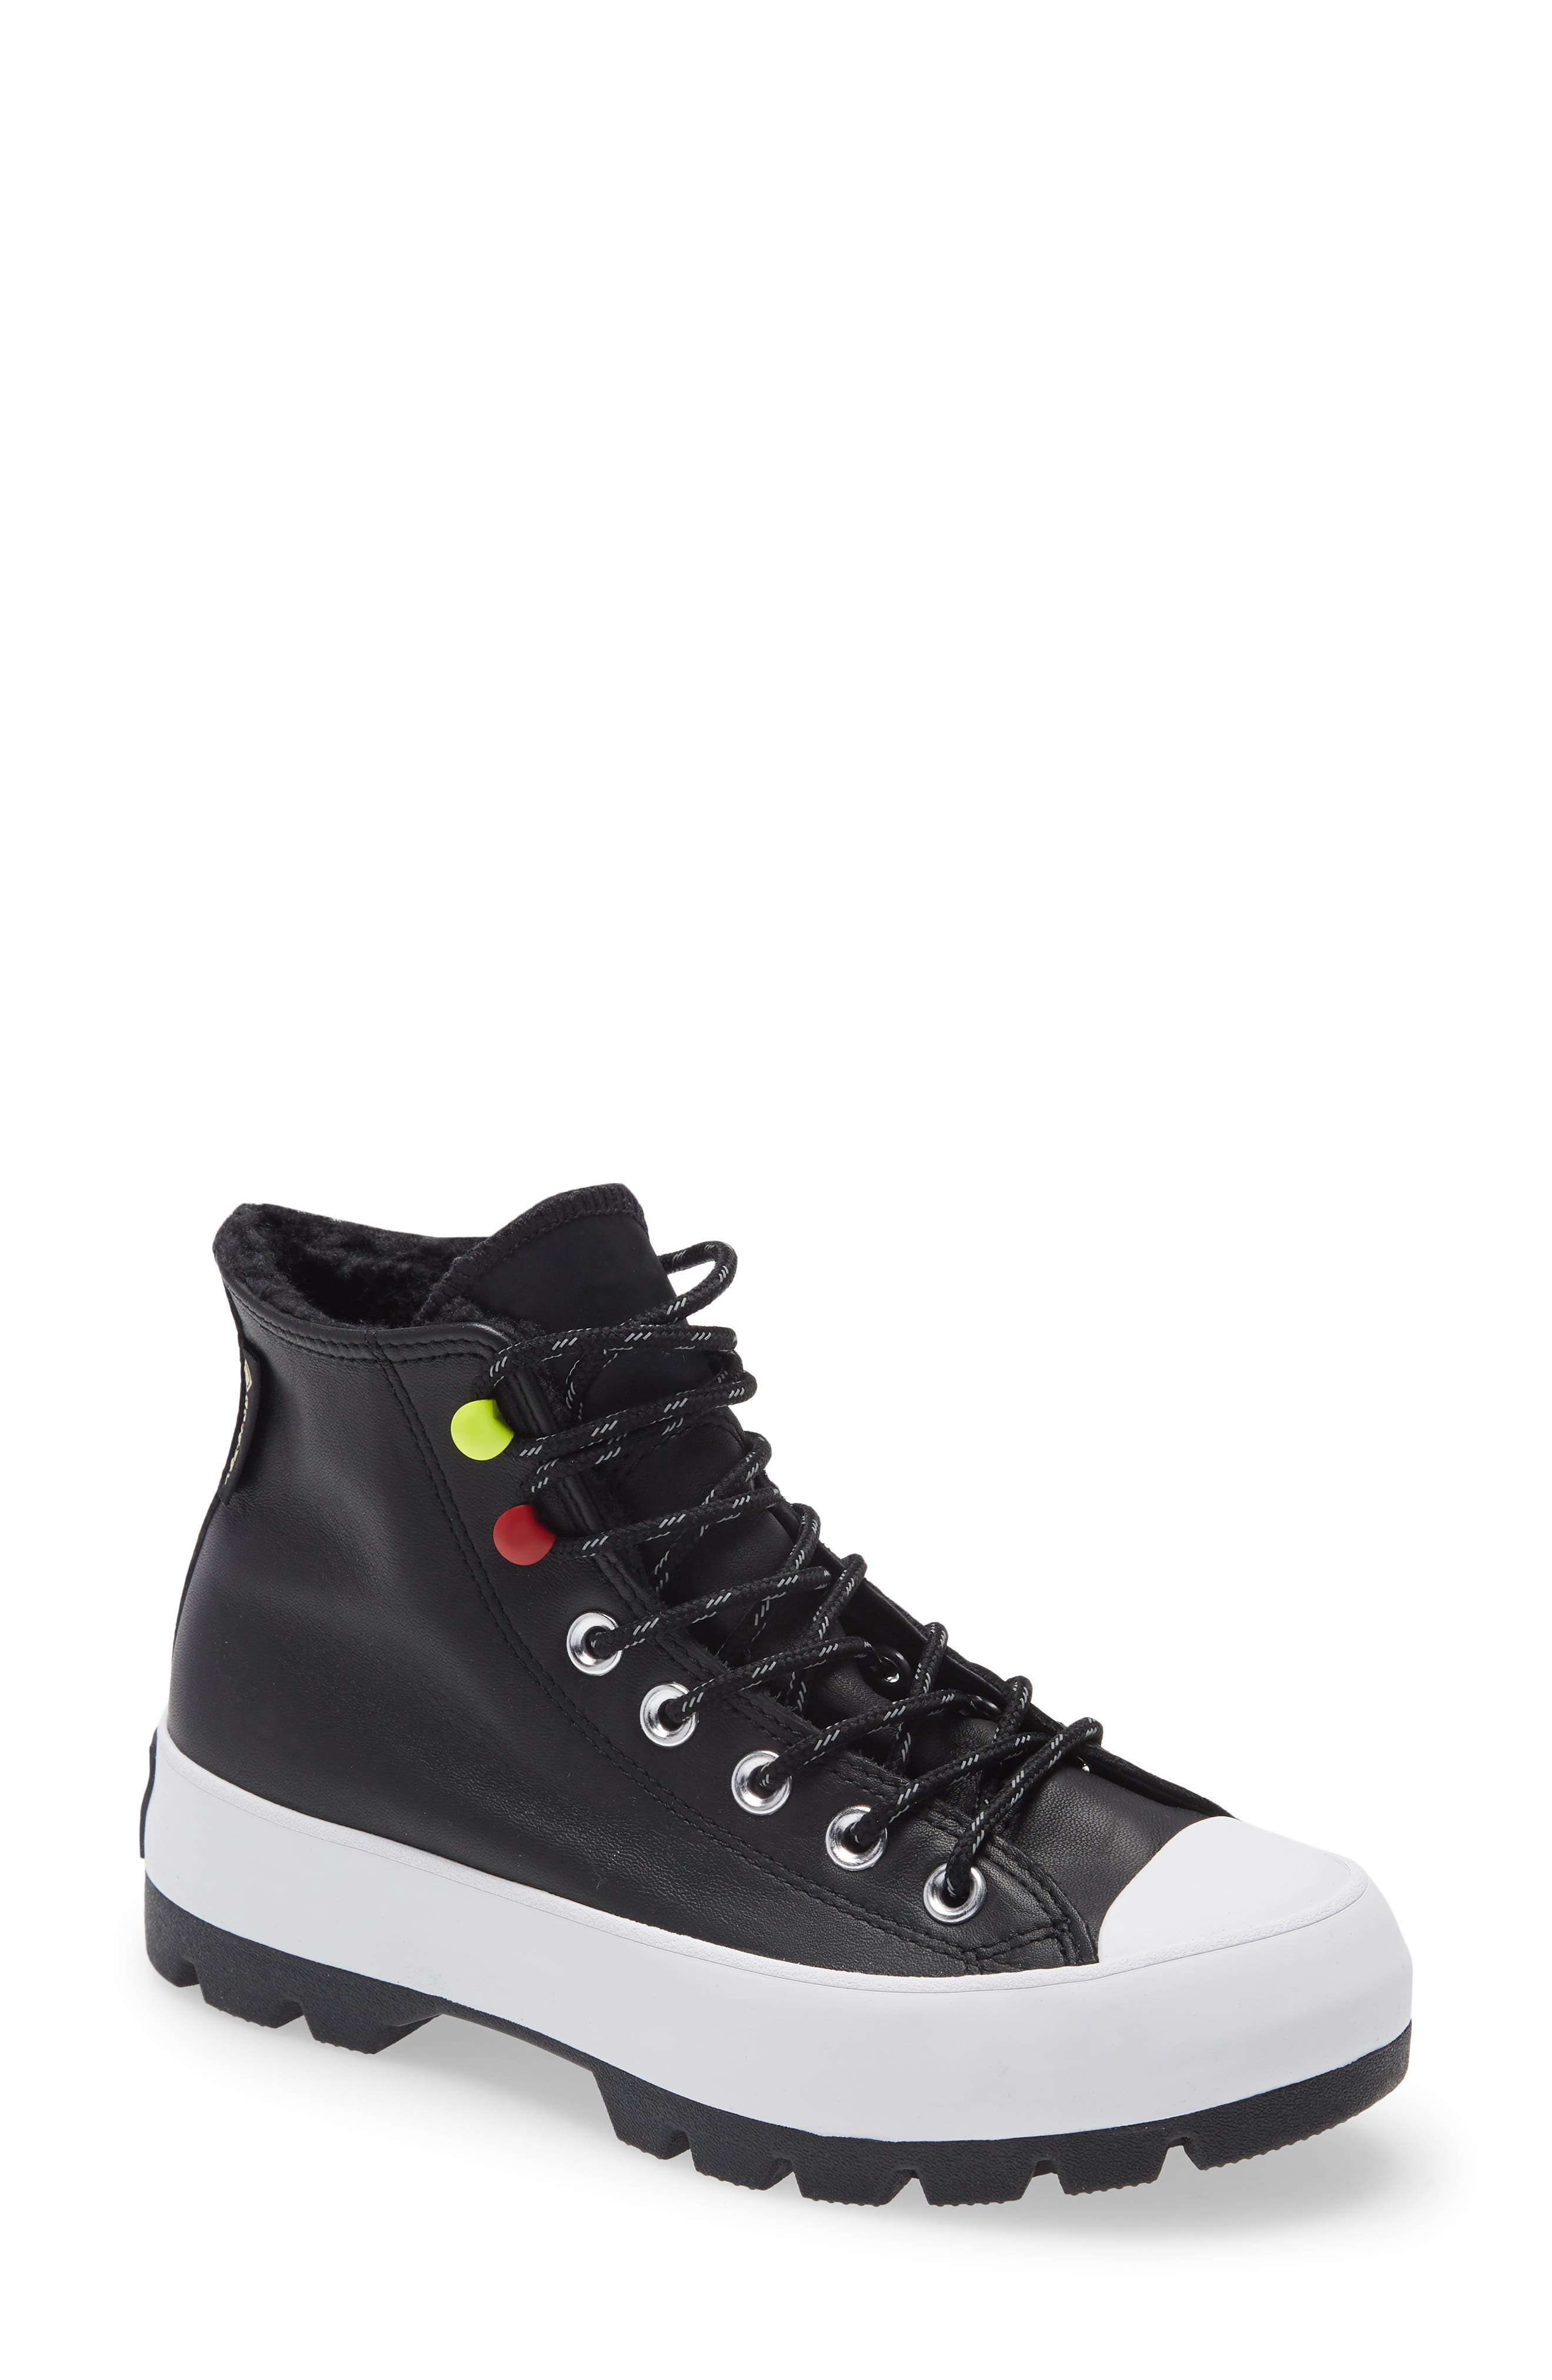 converse womens shoes clearance